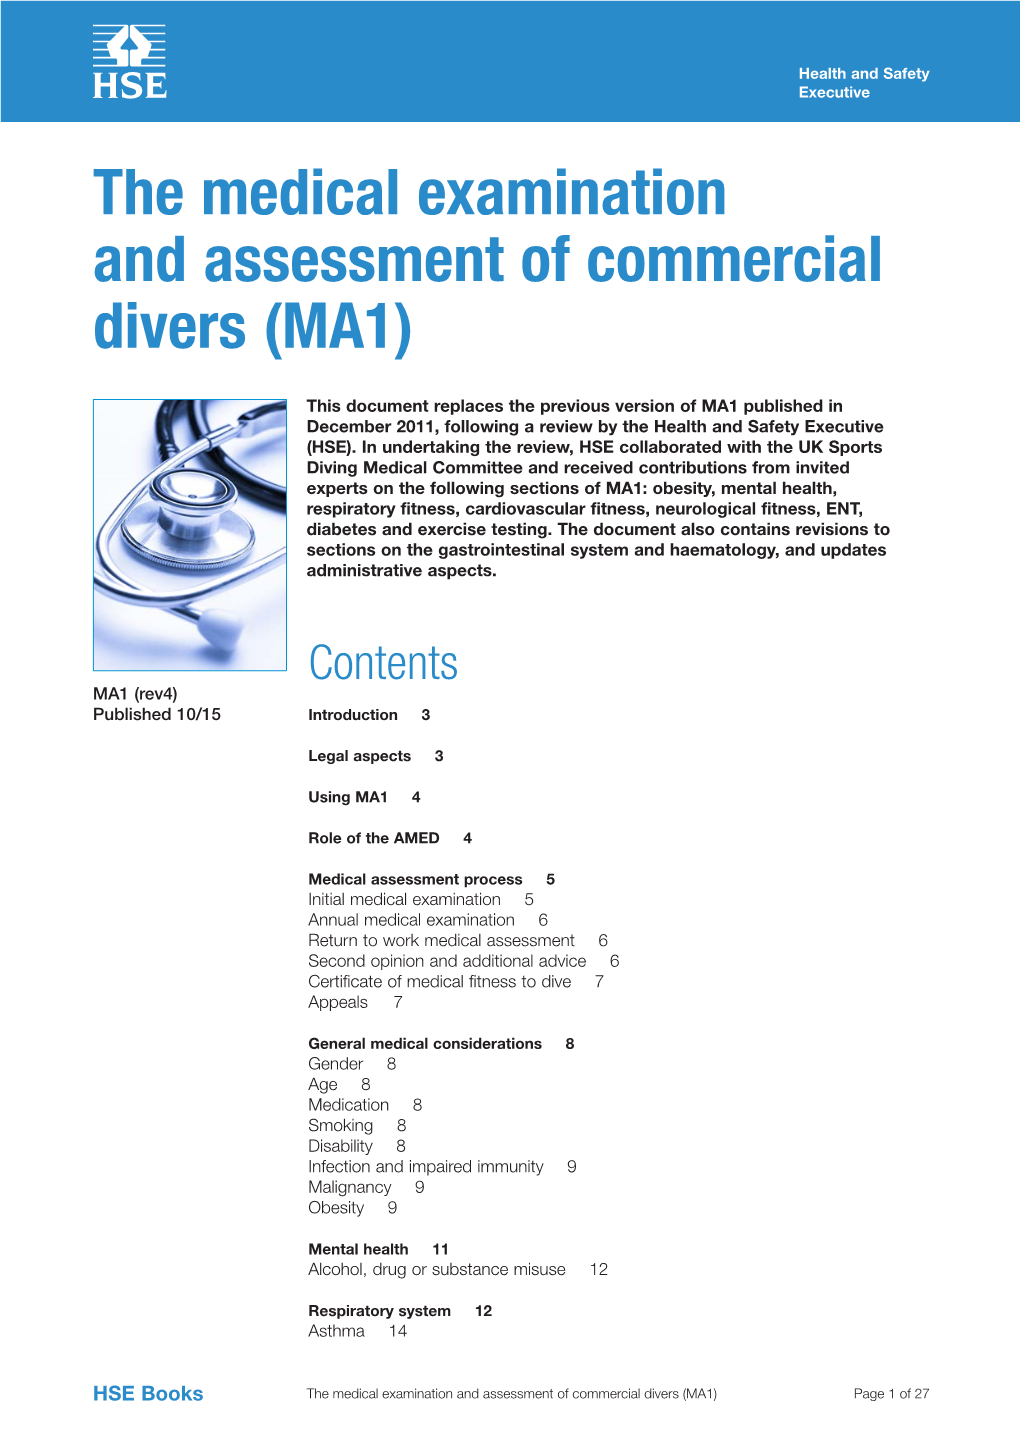 The Medical Examination and Assessment of Commercial Divers (MA1)